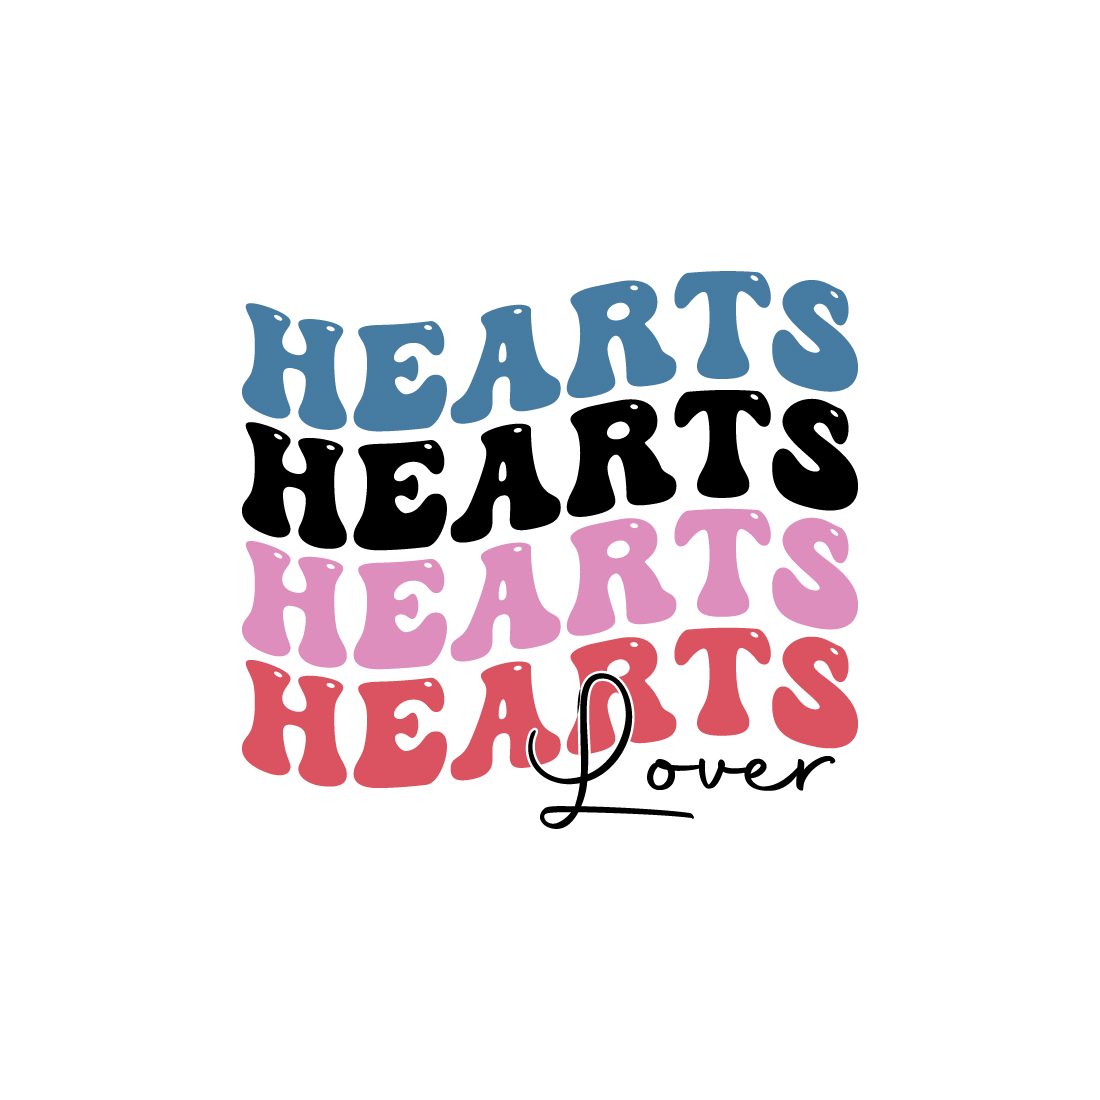 Hearts lover indoor game retro typography design for t-shirts, cards, frame artwork, phone cases, bags, mugs, stickers, tumblers, print, etc cover image.